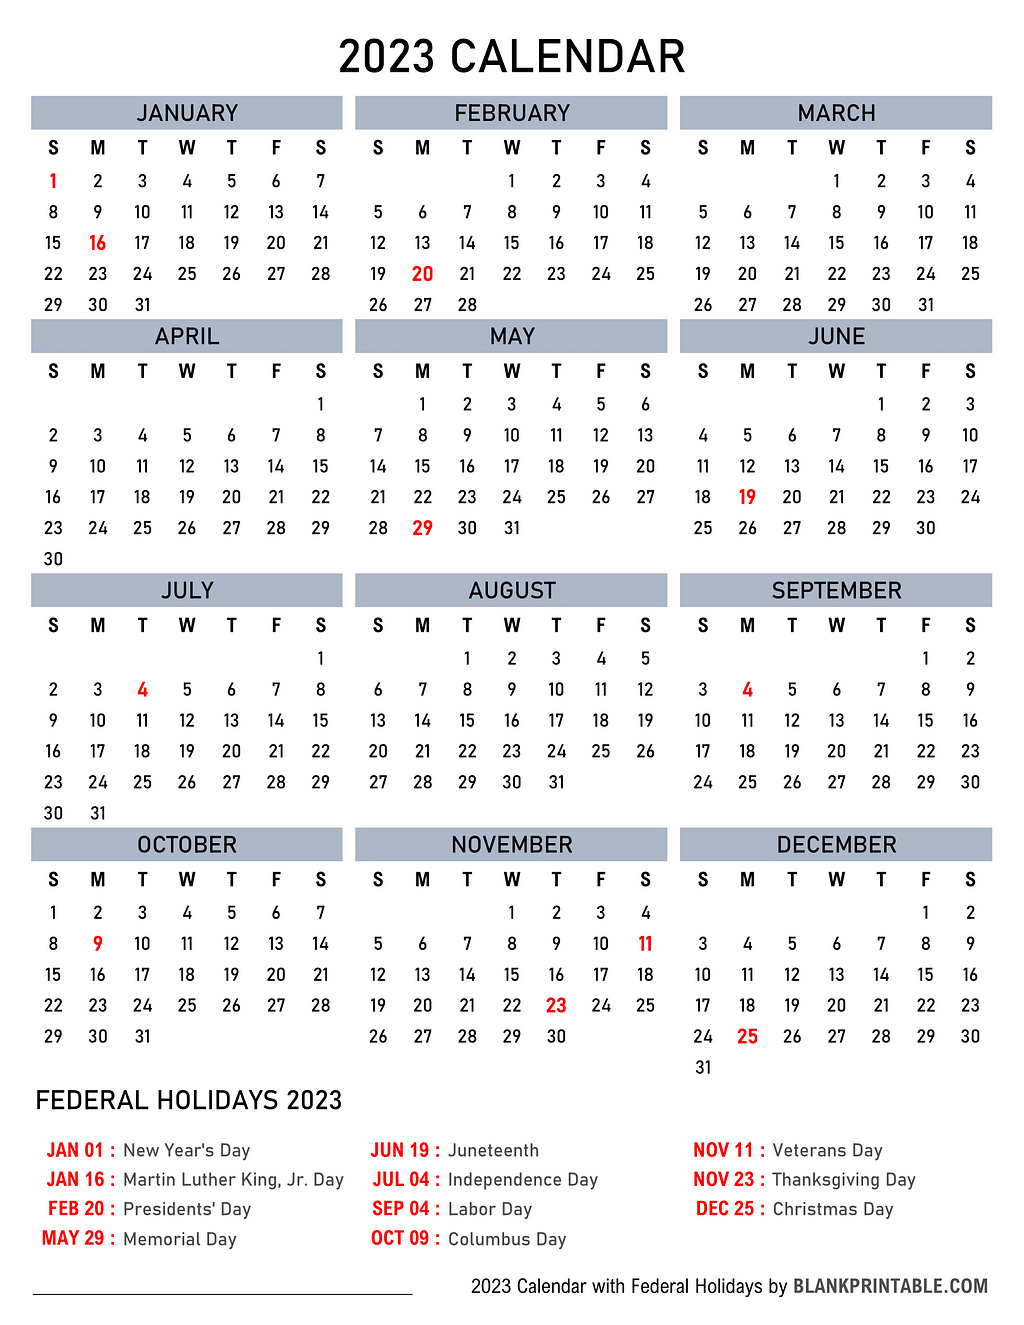 Downloadable and Printable 2023 Calendar with US Federal Holidays, Official, Public Holidays and Festivals.